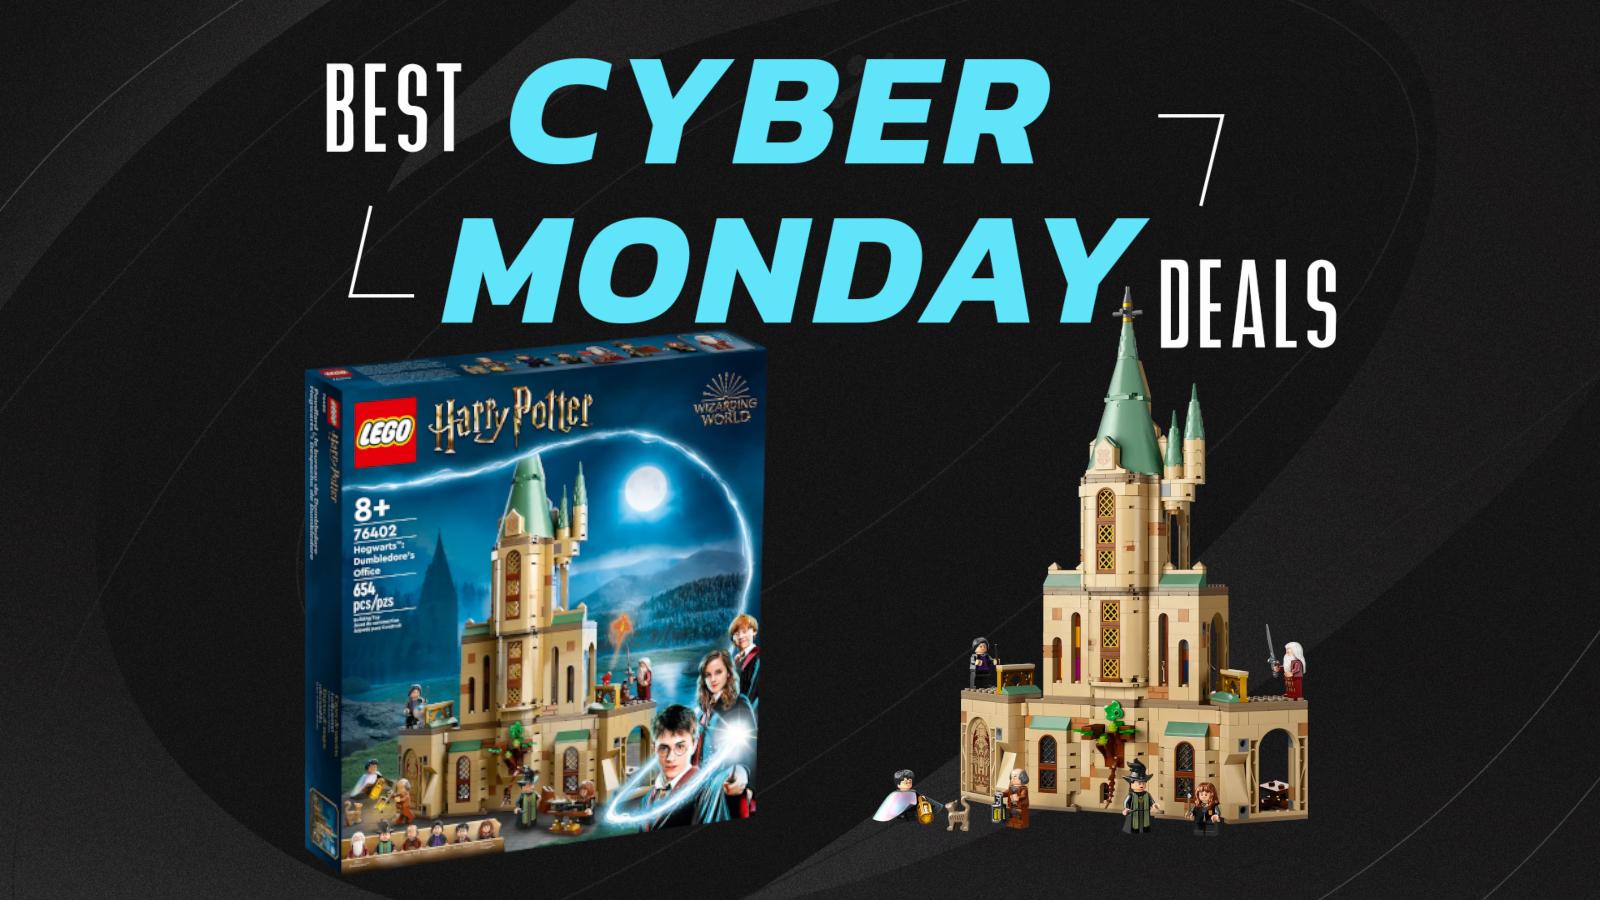 Cyber Monday Deals LEGO Harry Potter Hogwarts Dumbledore's office Cover Image